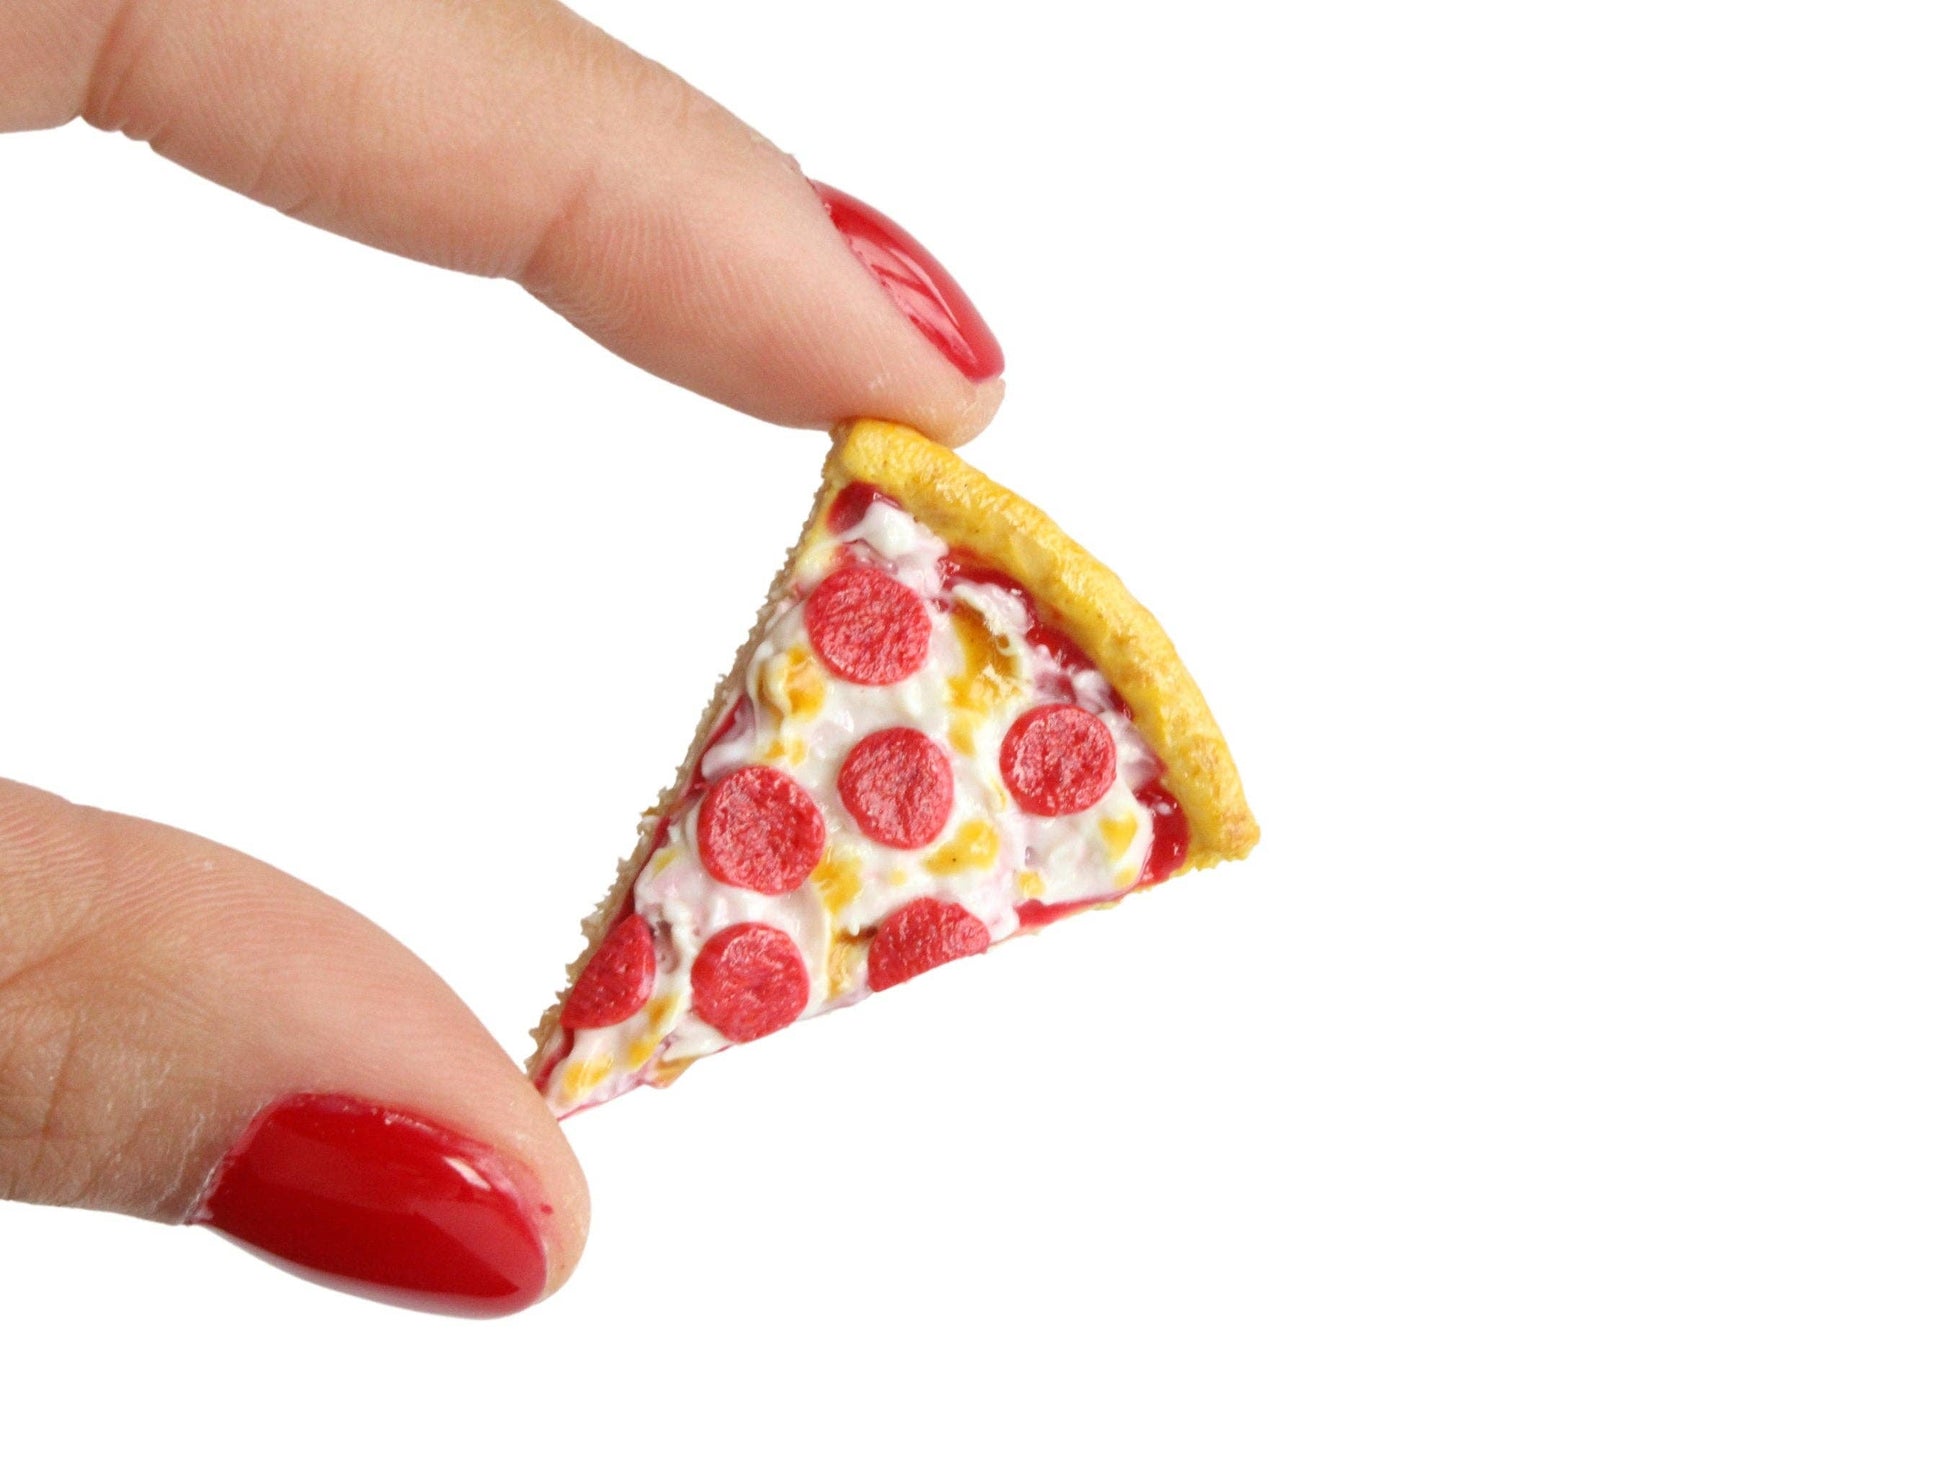 Handmade magnet shaped like a single slice of pepperoni pizza. Shown held between two fingers for size comparison.